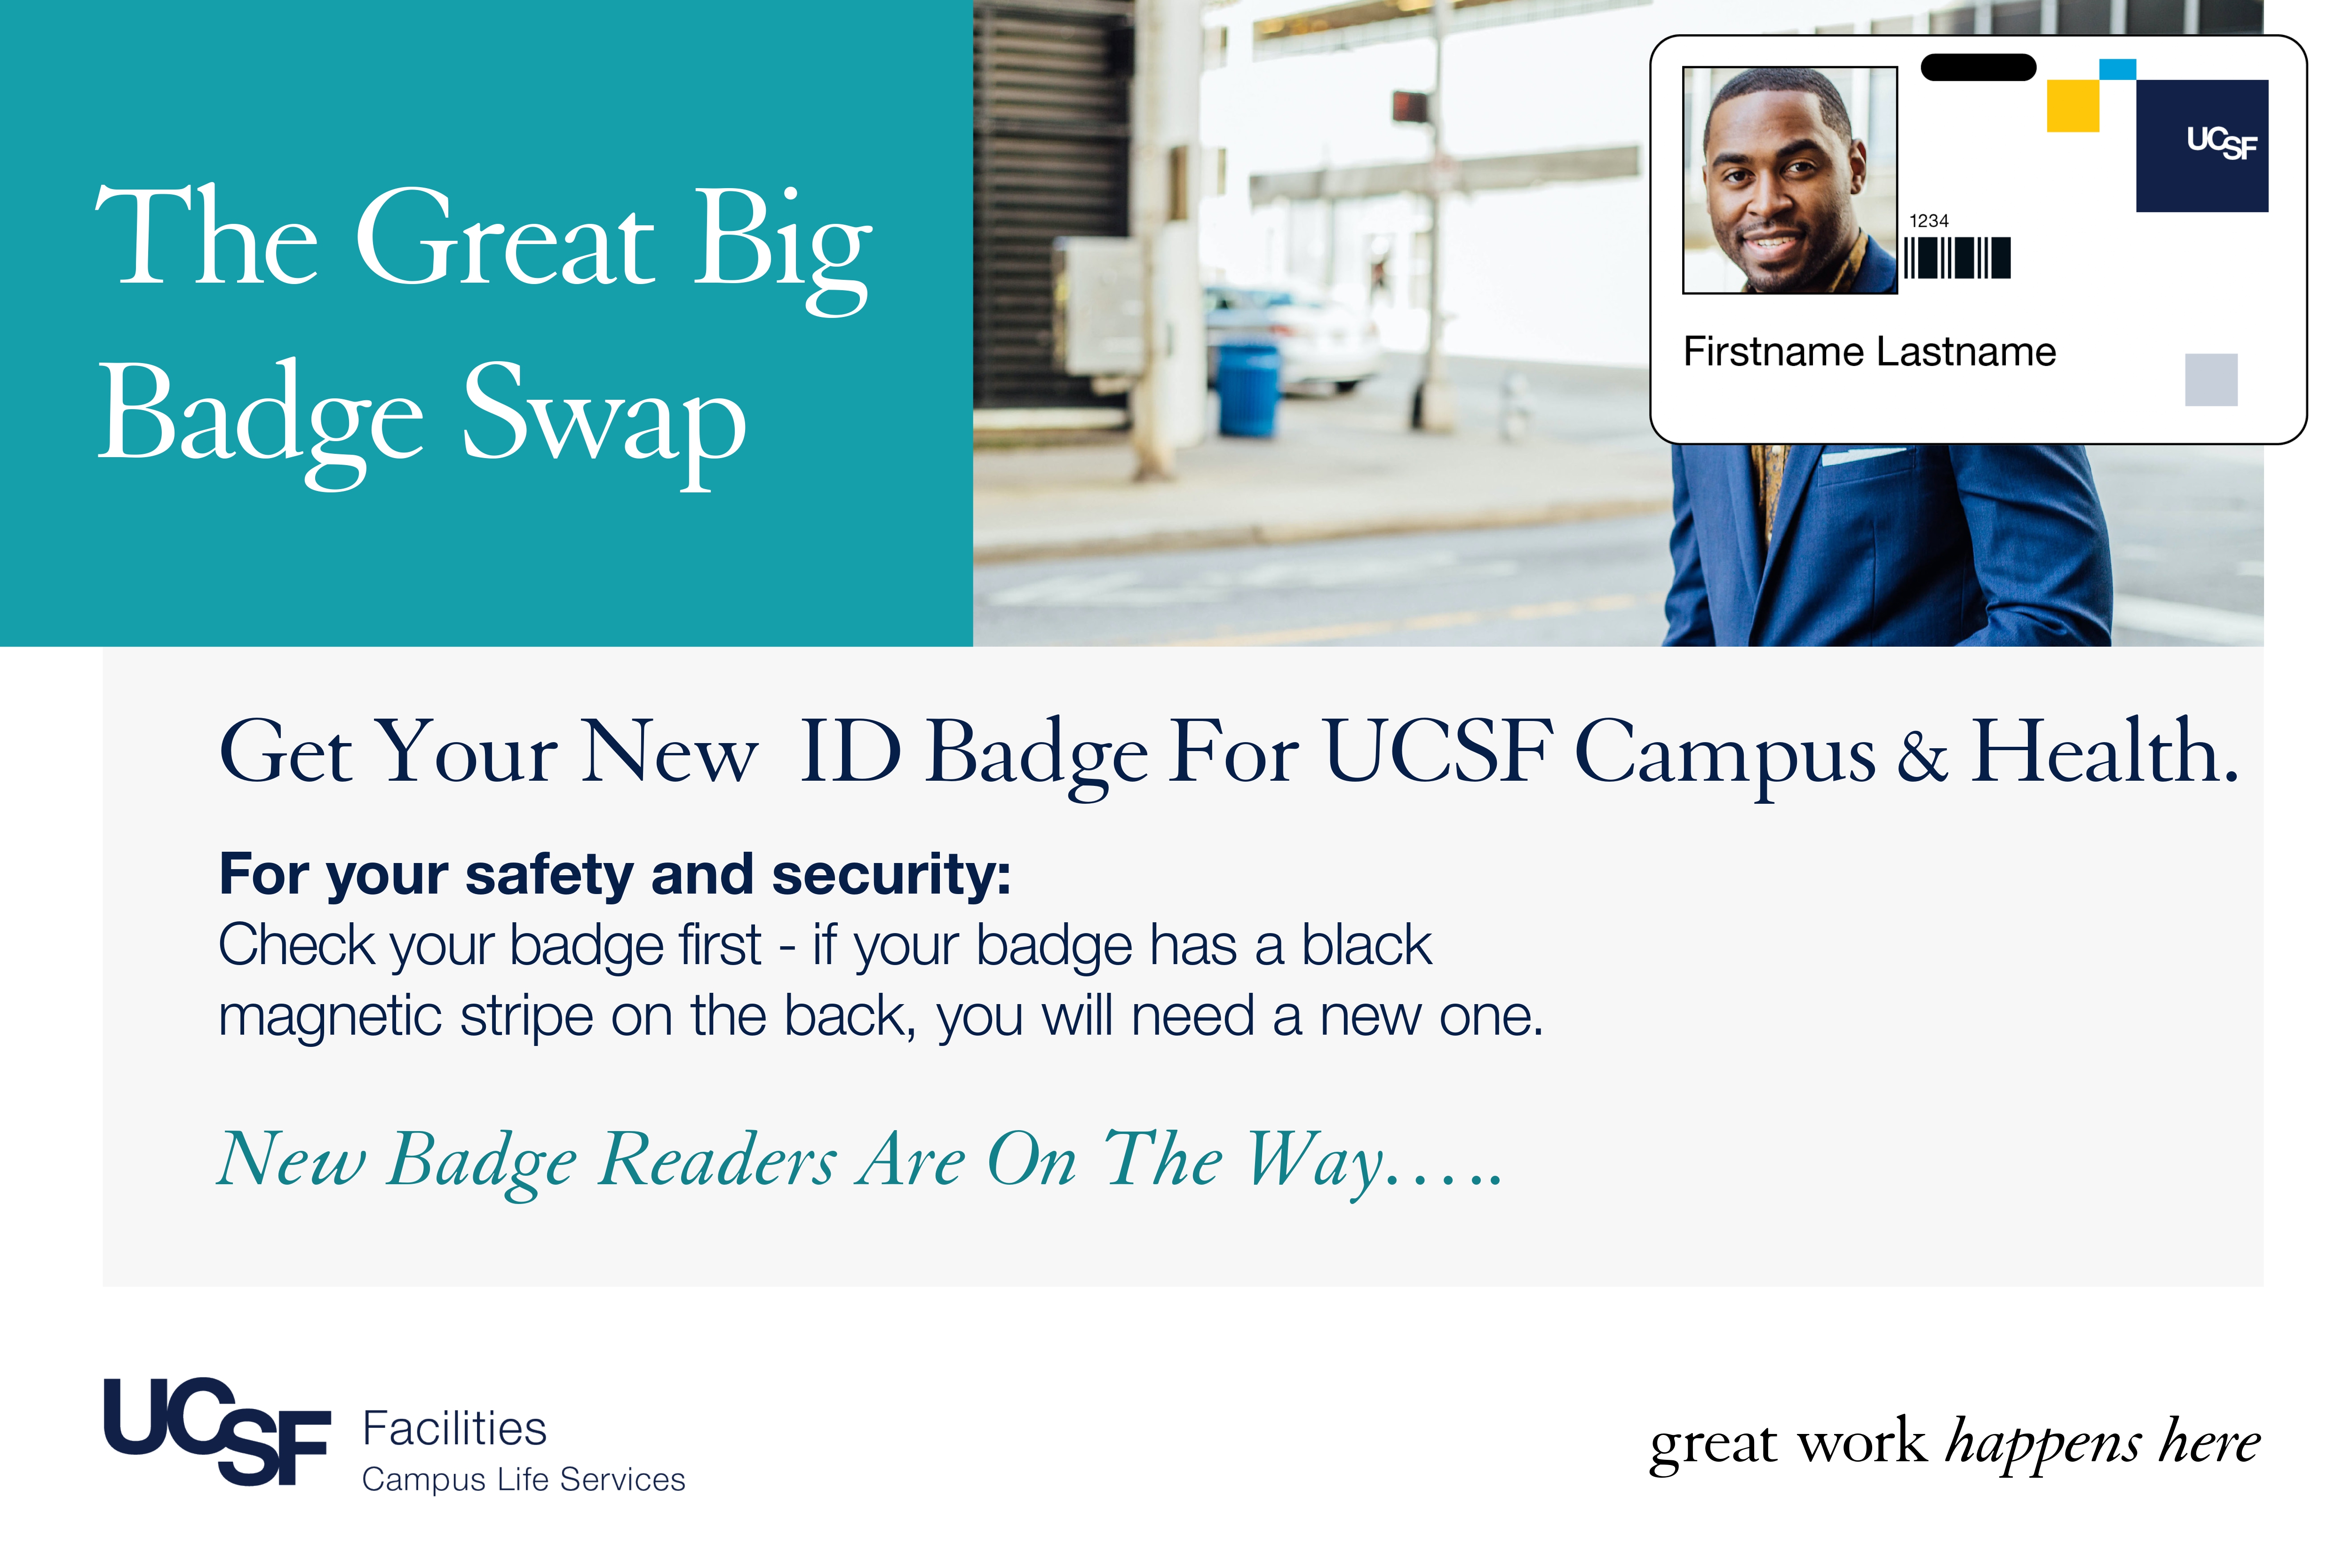 The Great Big Badge Swap - UCSF Campus Life Services